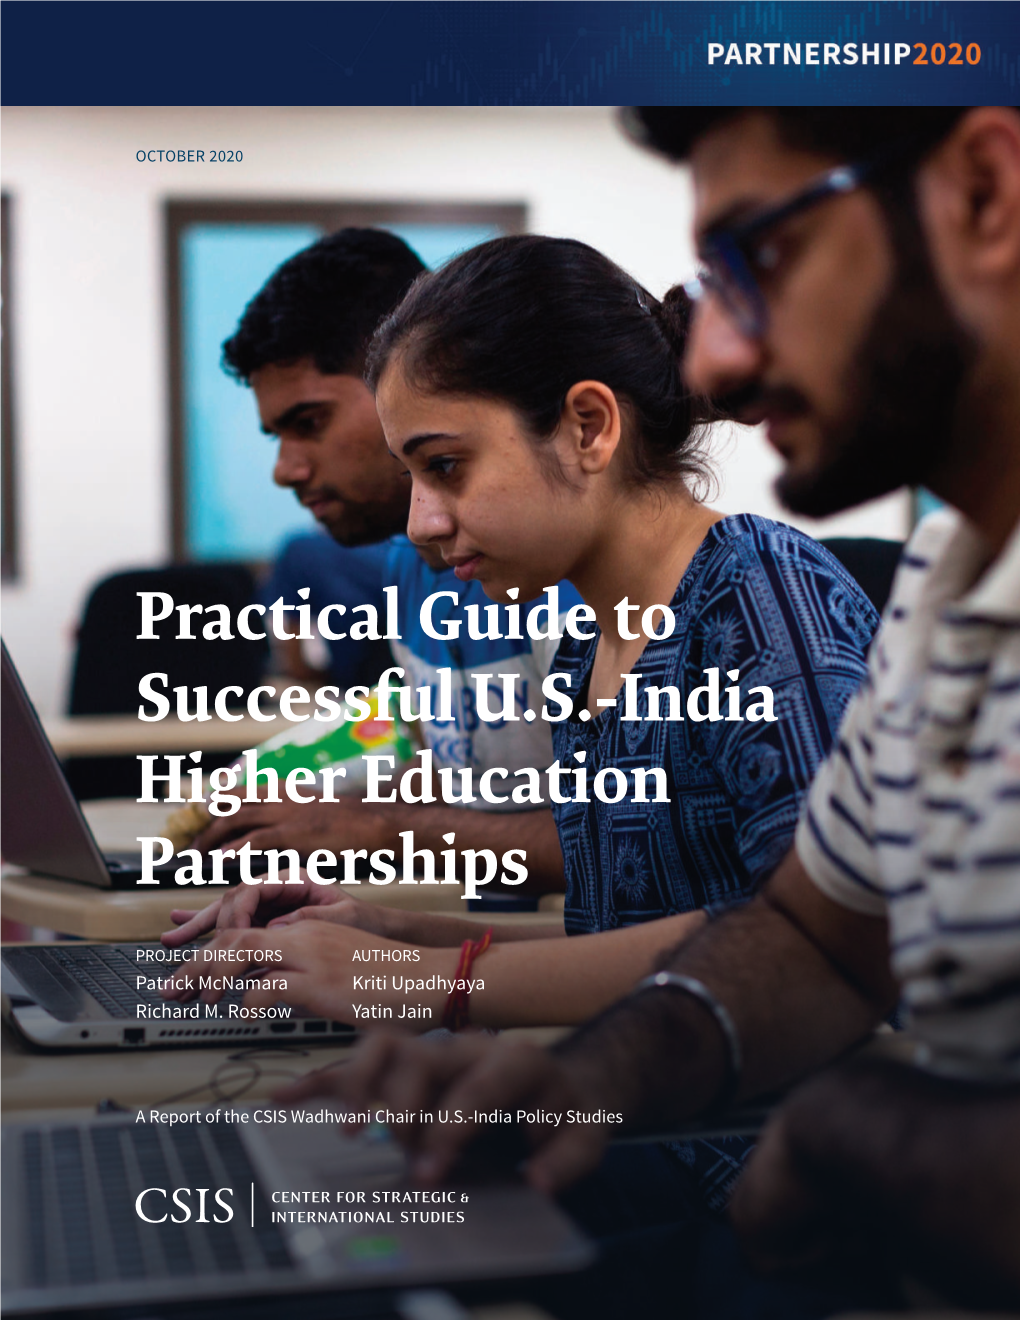 Practical Guide to Successful U.S.-India Higher Education Partnerships